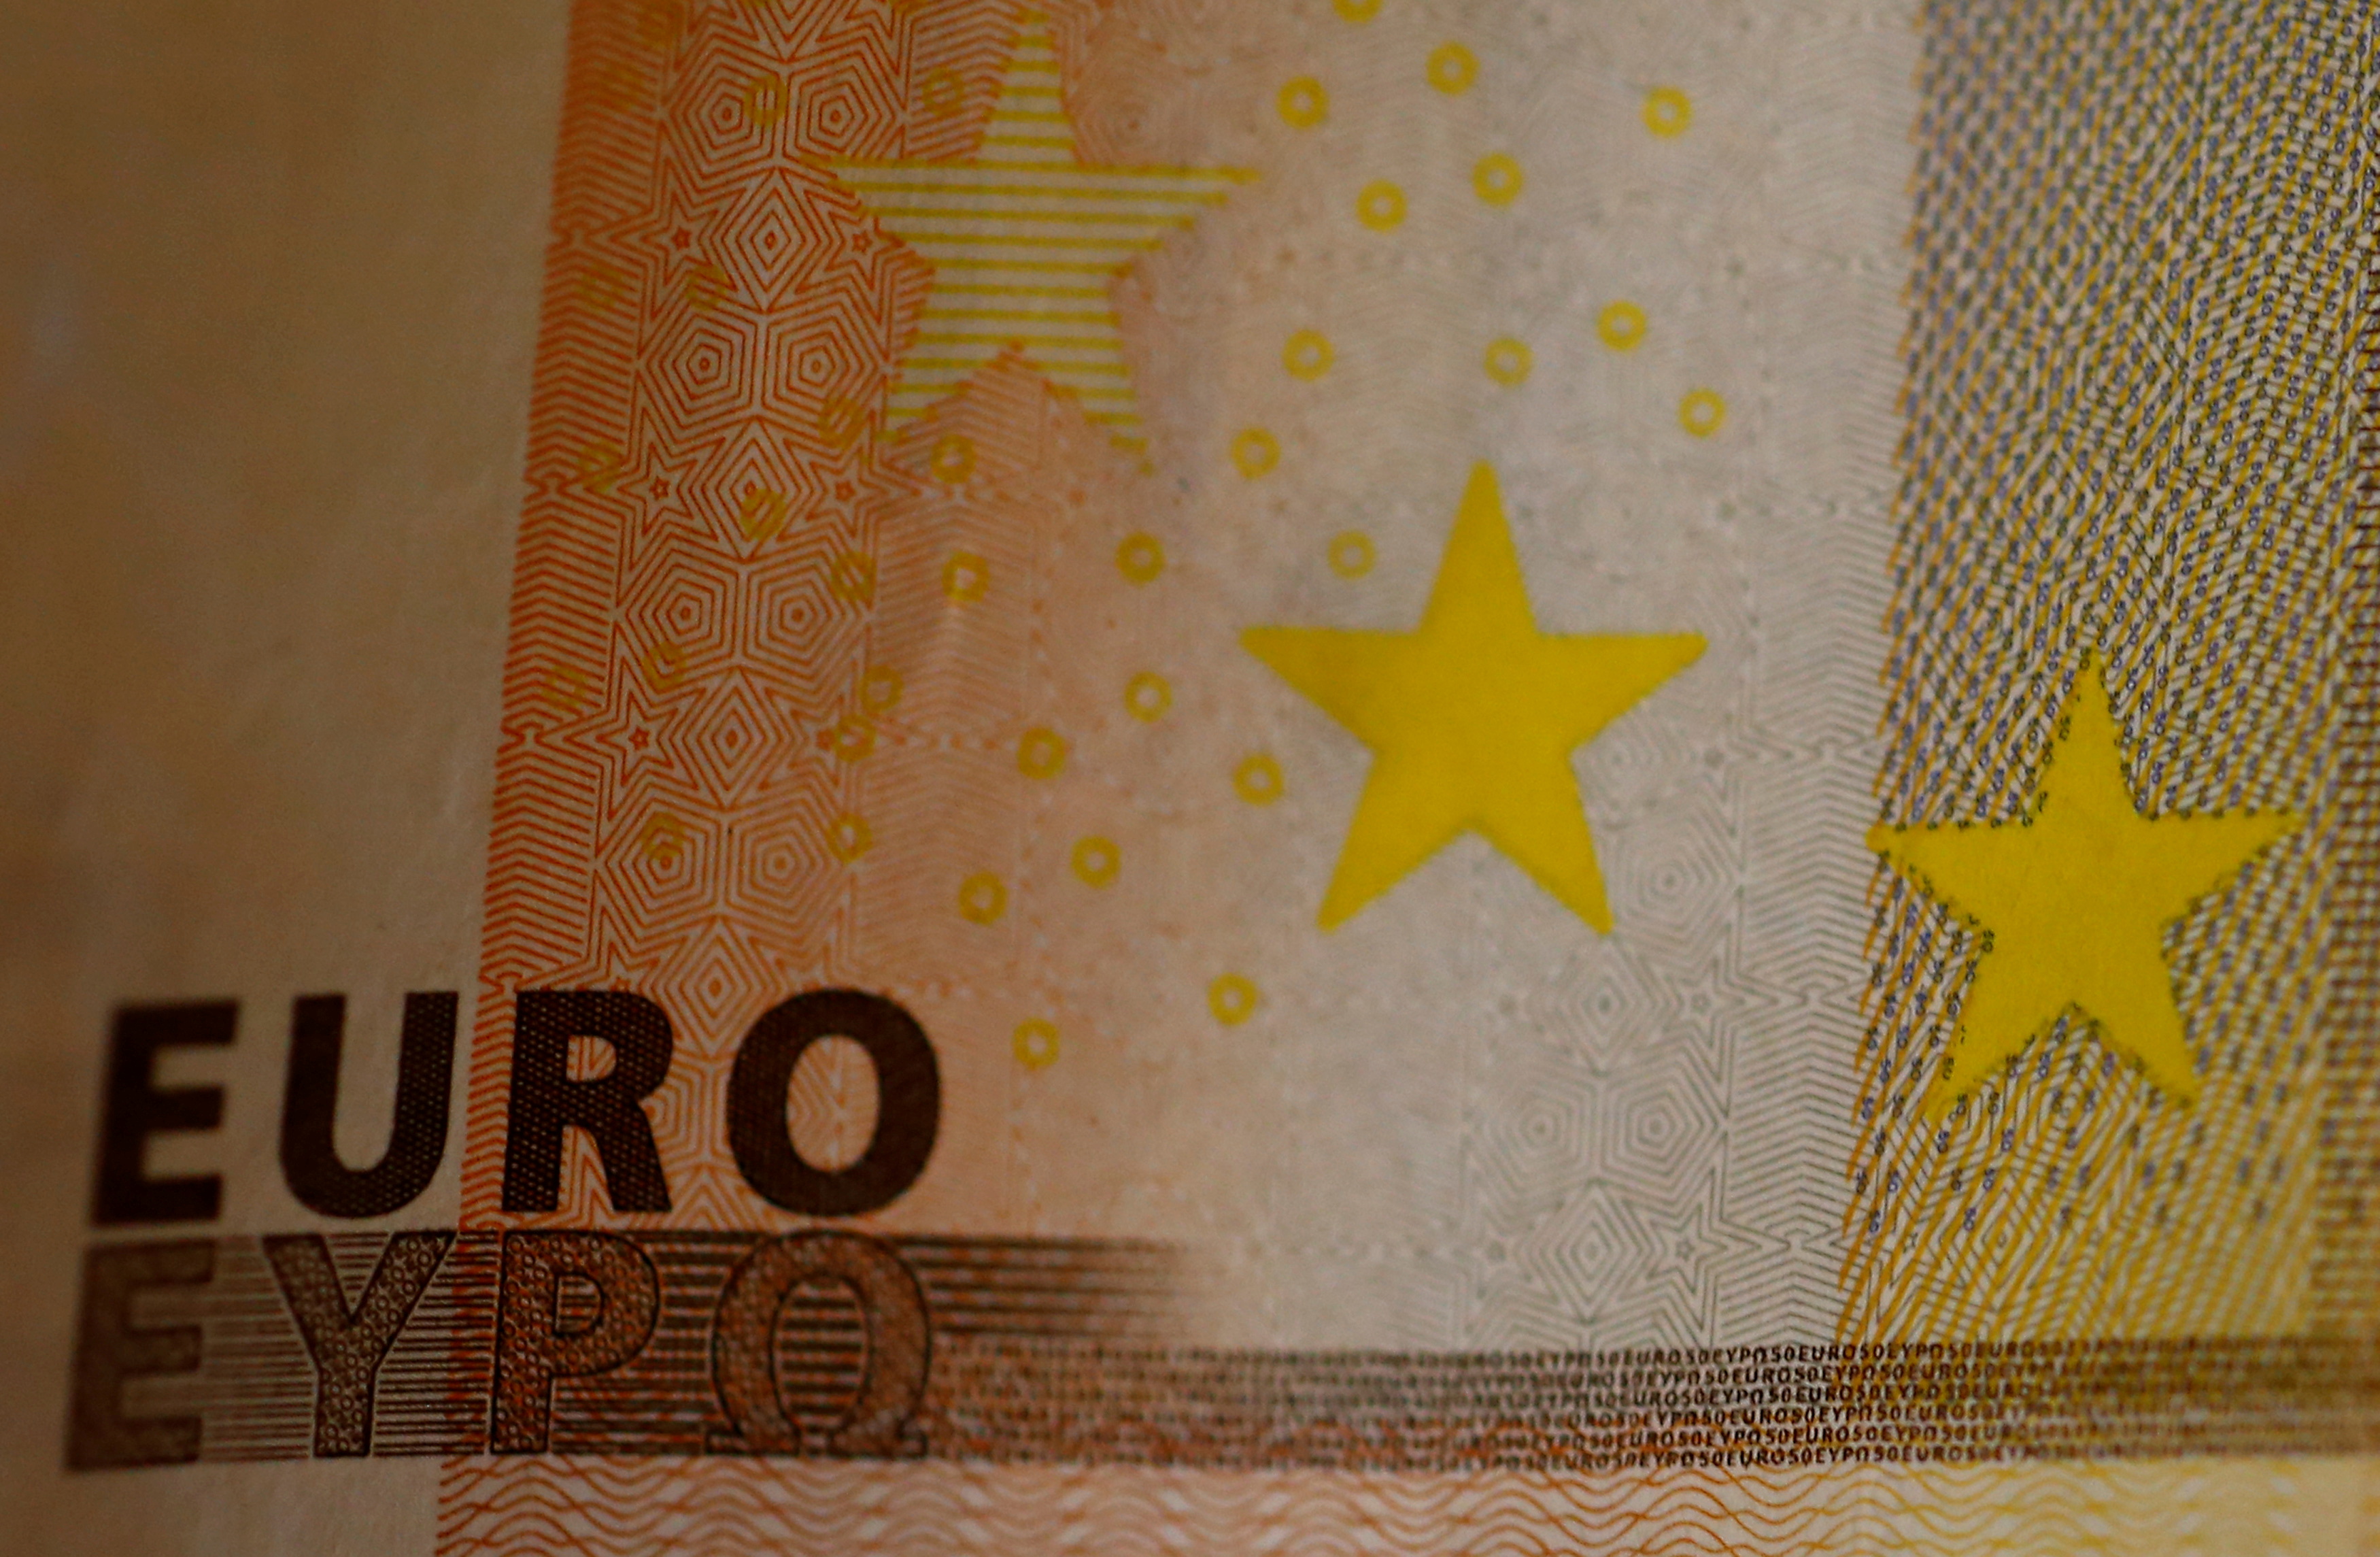 A 50 Euro banknote is seen in a picture illustration.